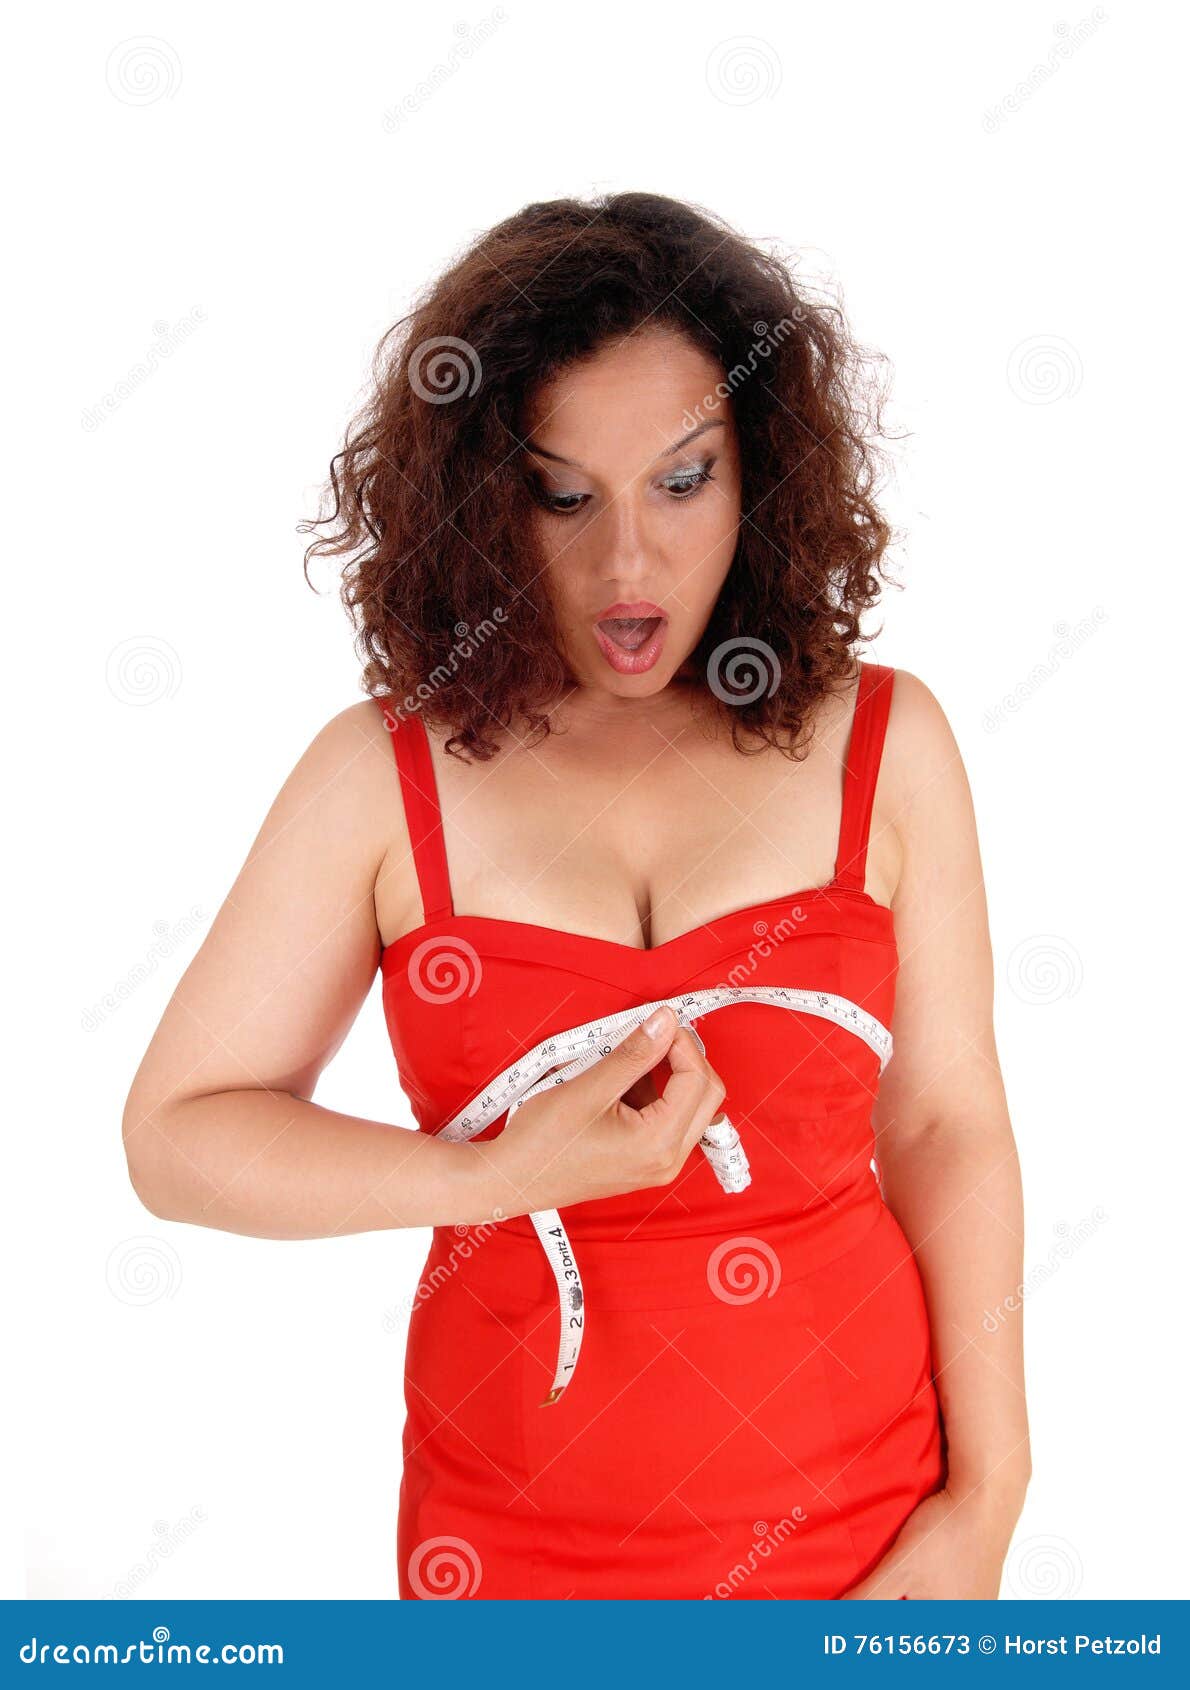 Woman Messaging Her Breast. Stock Image - Image of measurement, adult:  76156673